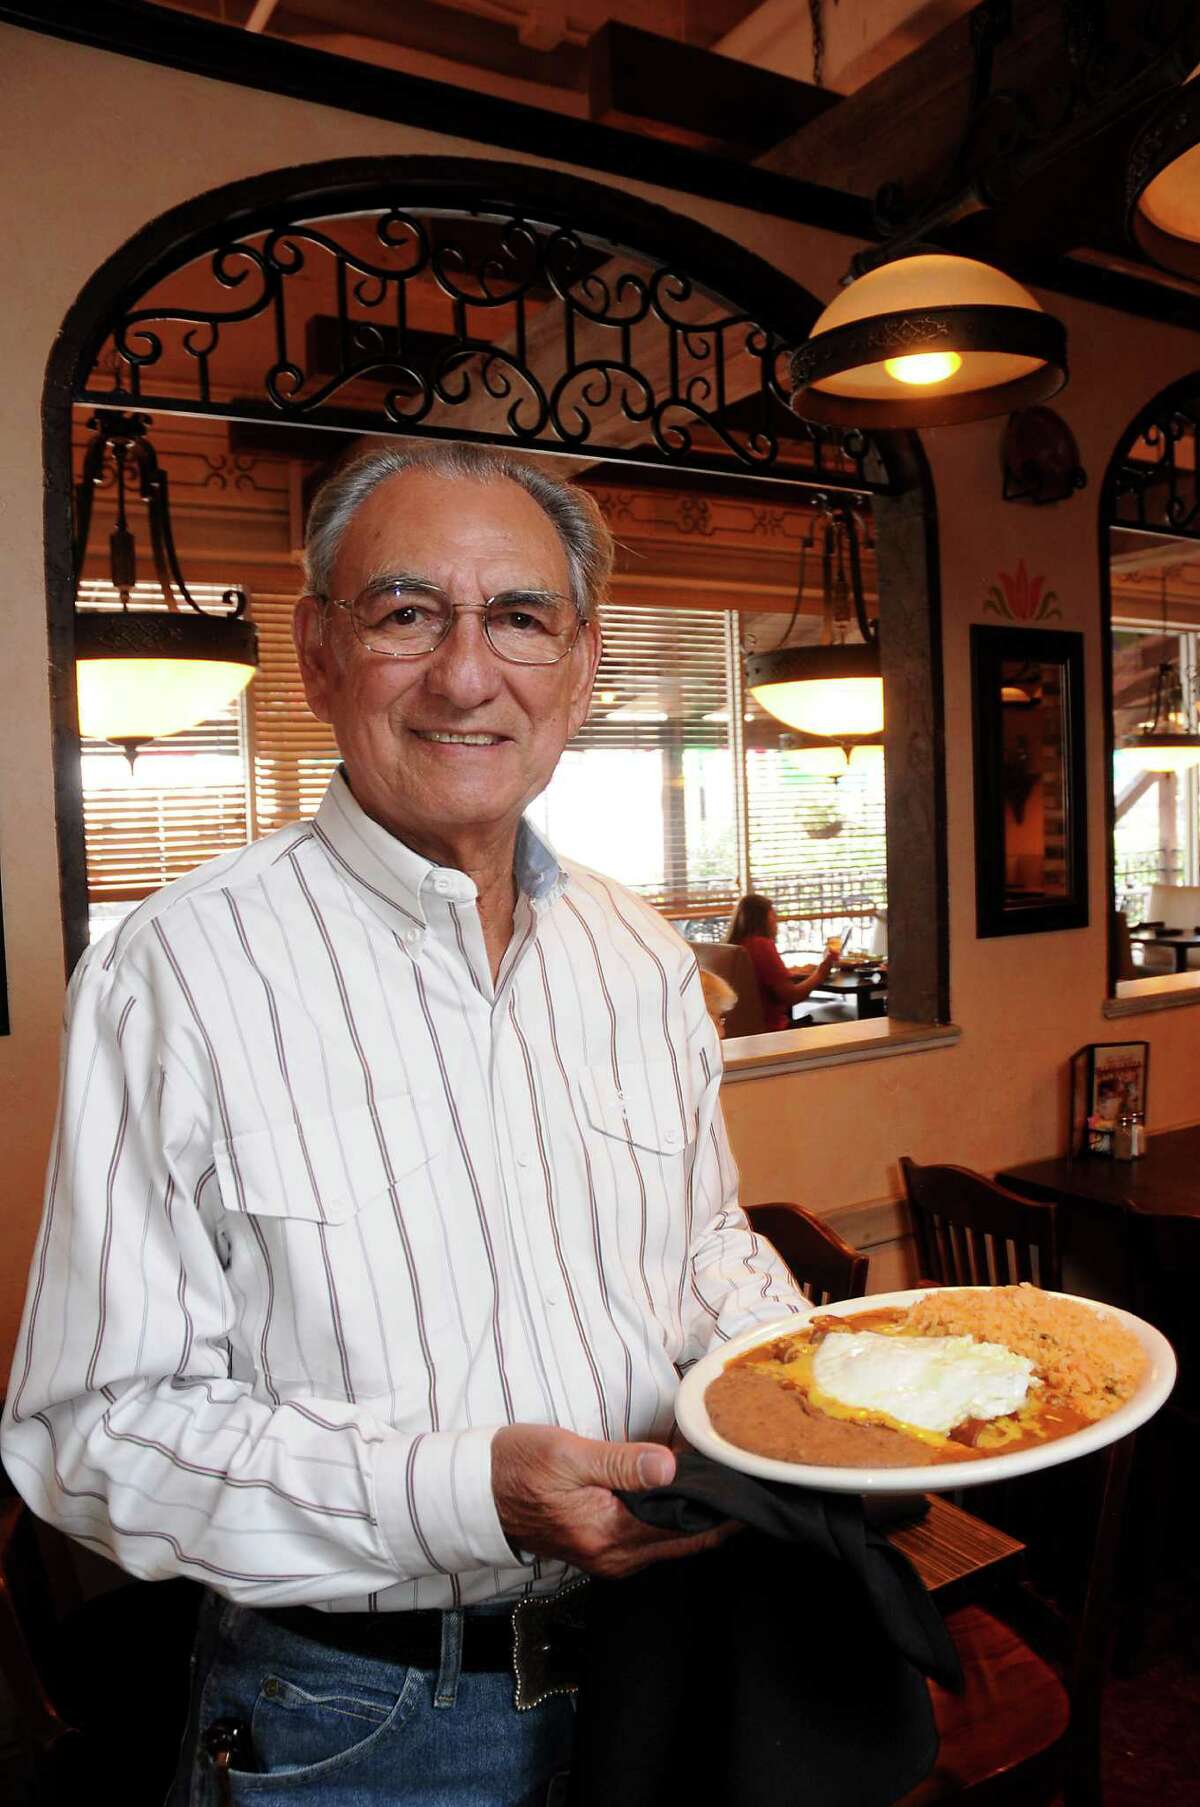 Raul Molina Jr. with a plate of cheese enchiladas and a fried egg at Molina's Cantina on Bellaire Tuesday Aug. 30, 2016. (Dave Rossman Photo)